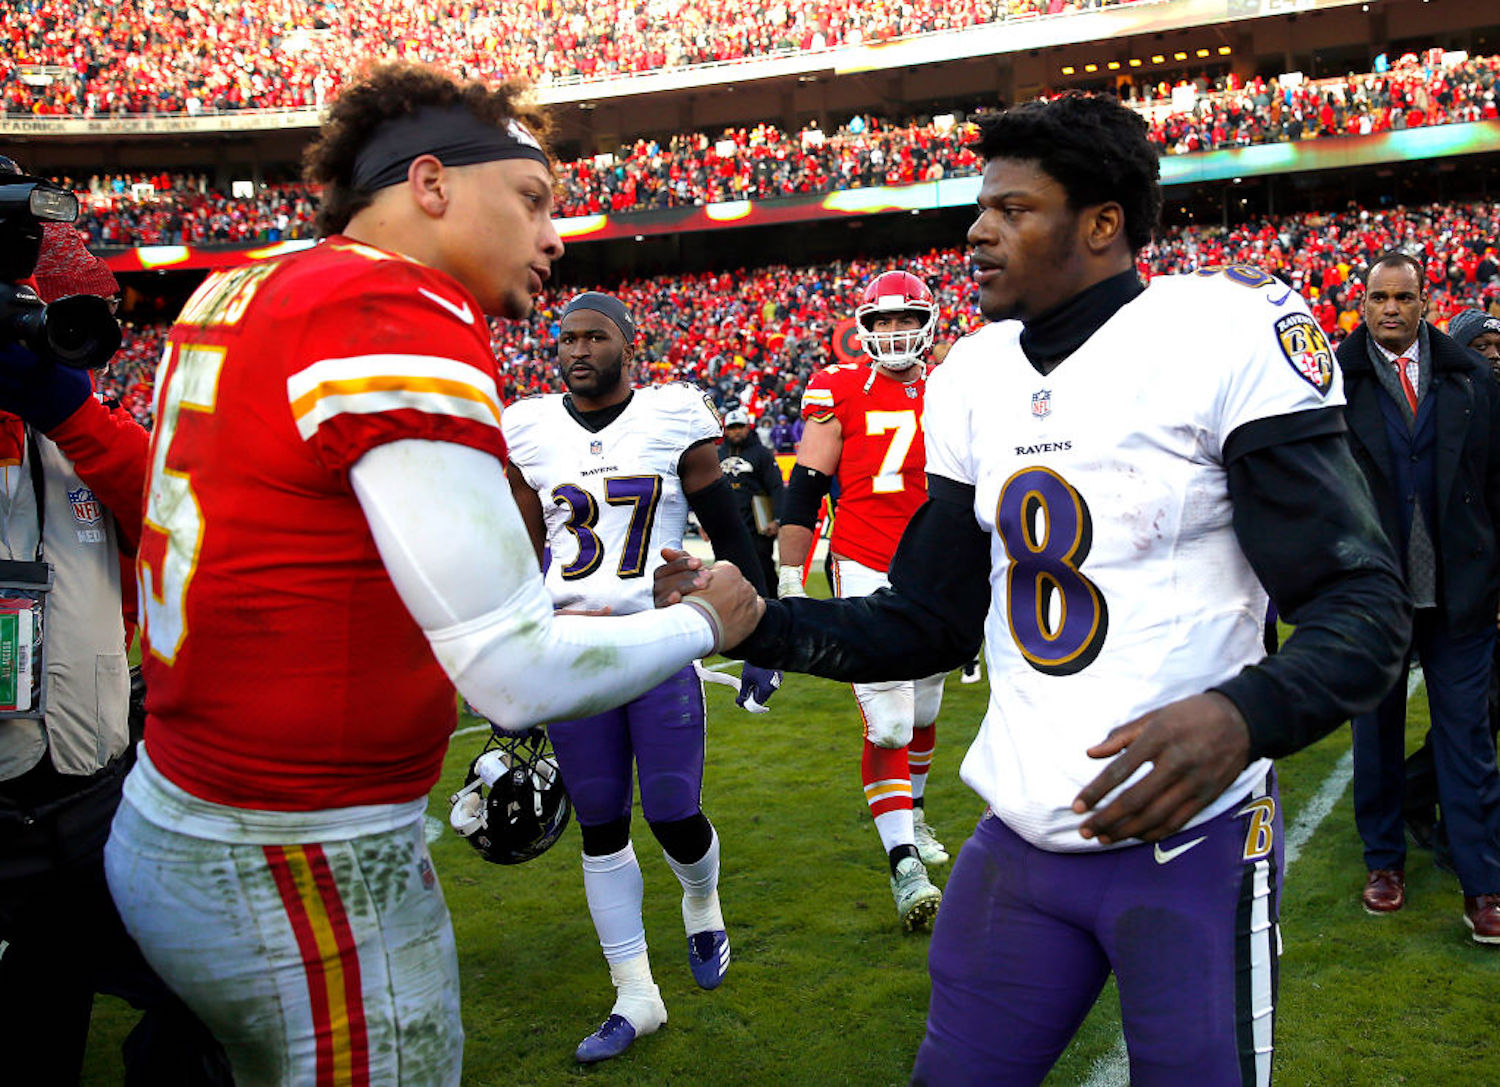 Patrick Mahomes and Lamar Jackson are the two faces of the NFL today, but what are their net worths and whose is higher?